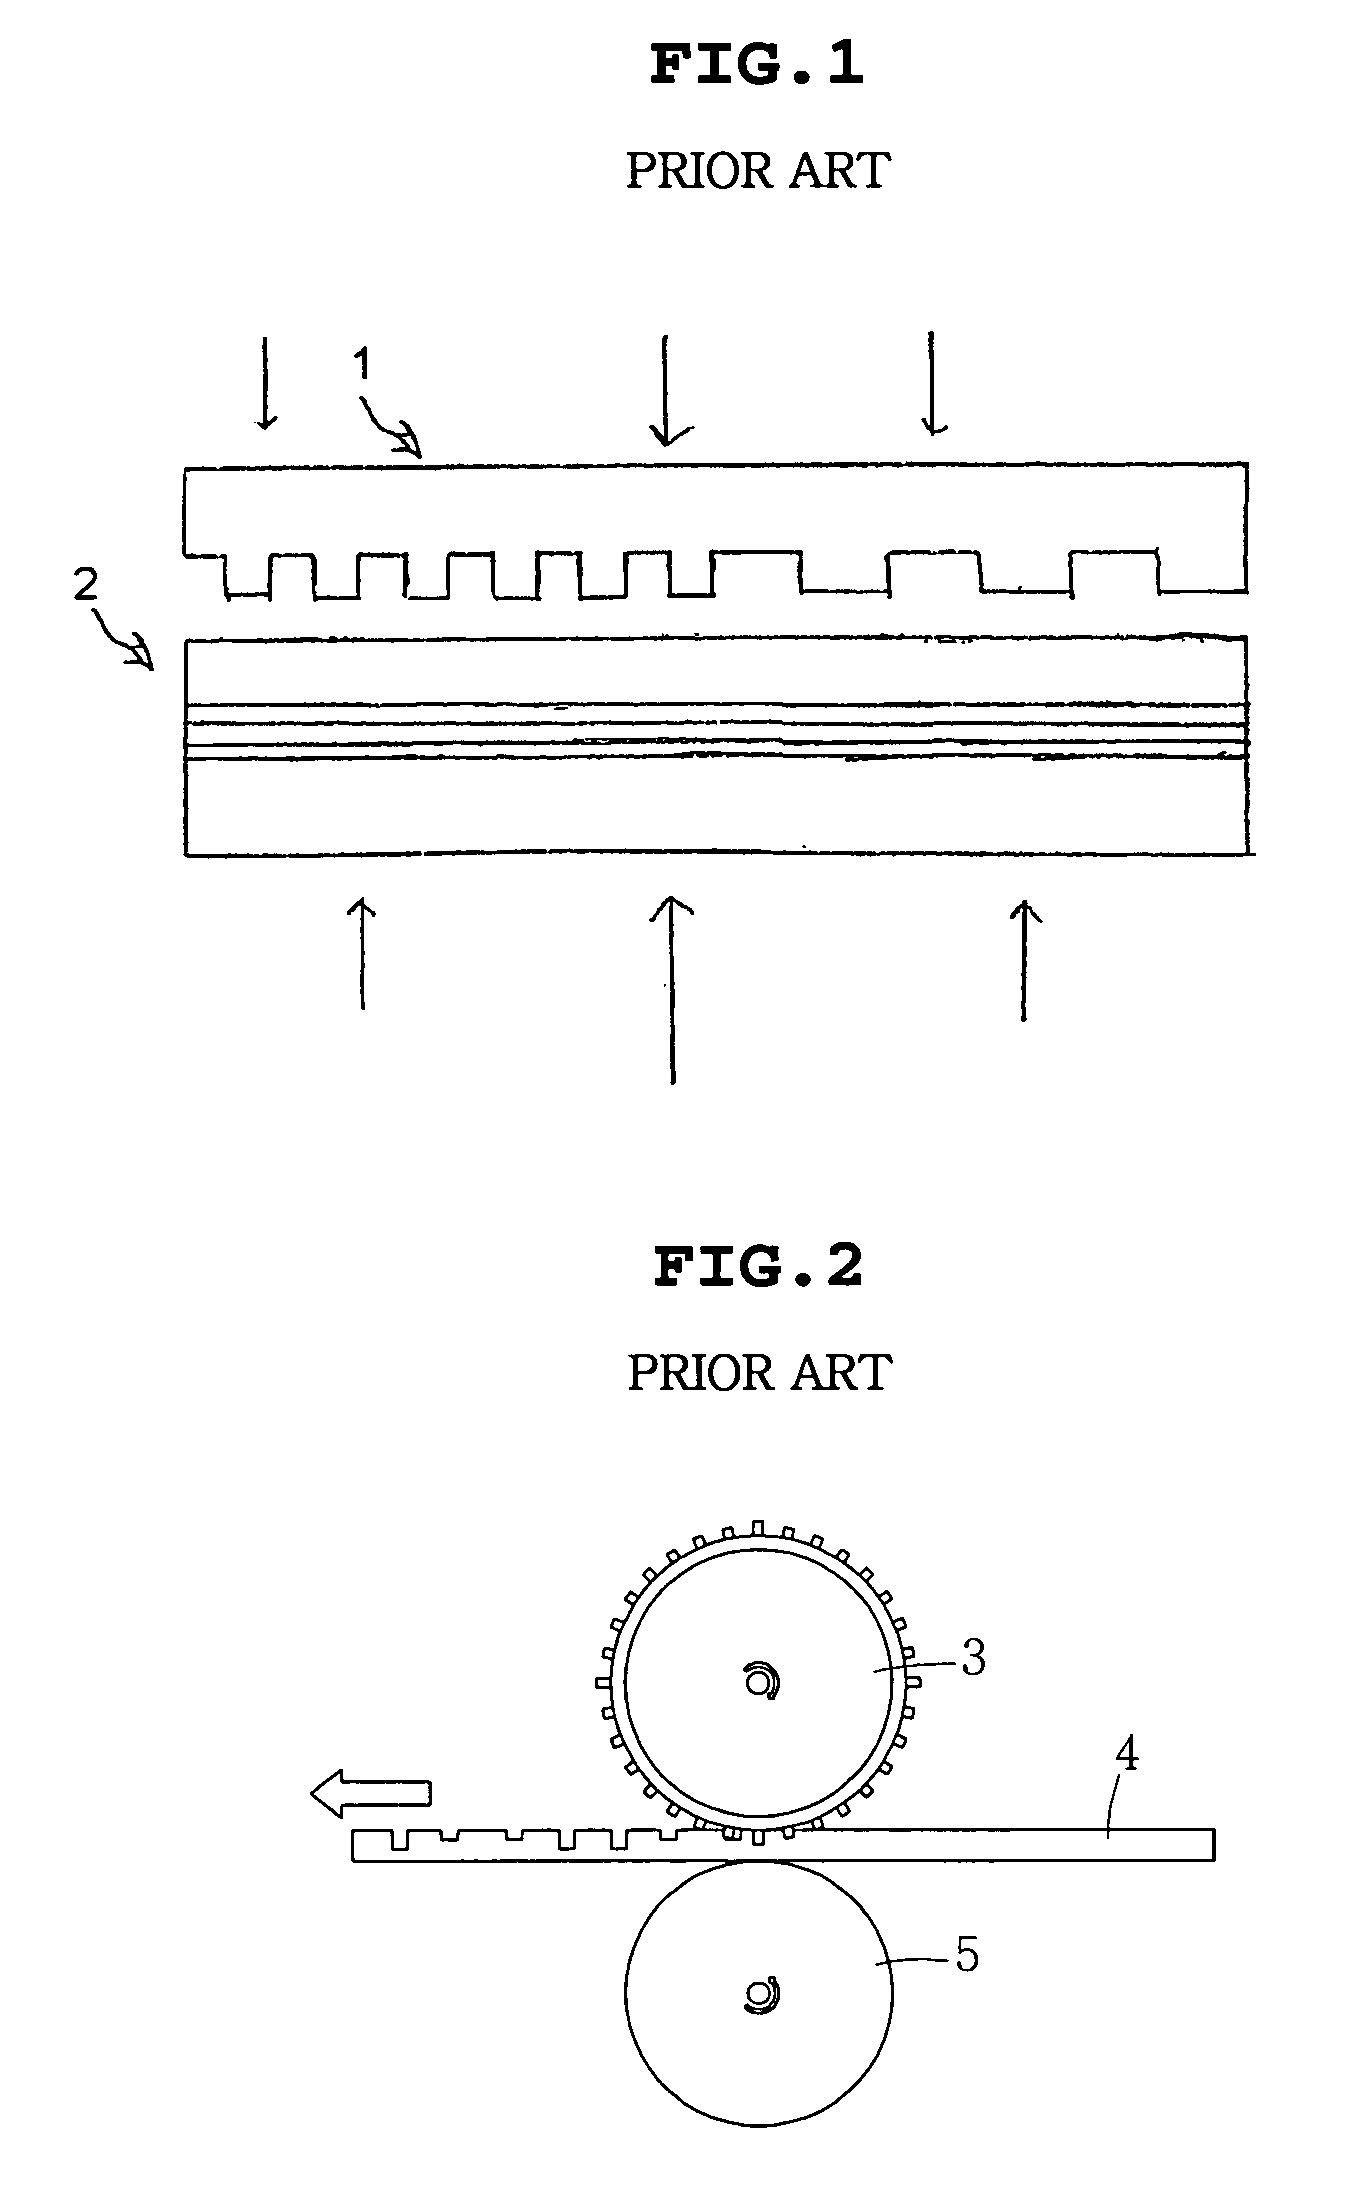 Imprinting apparatus, system and method